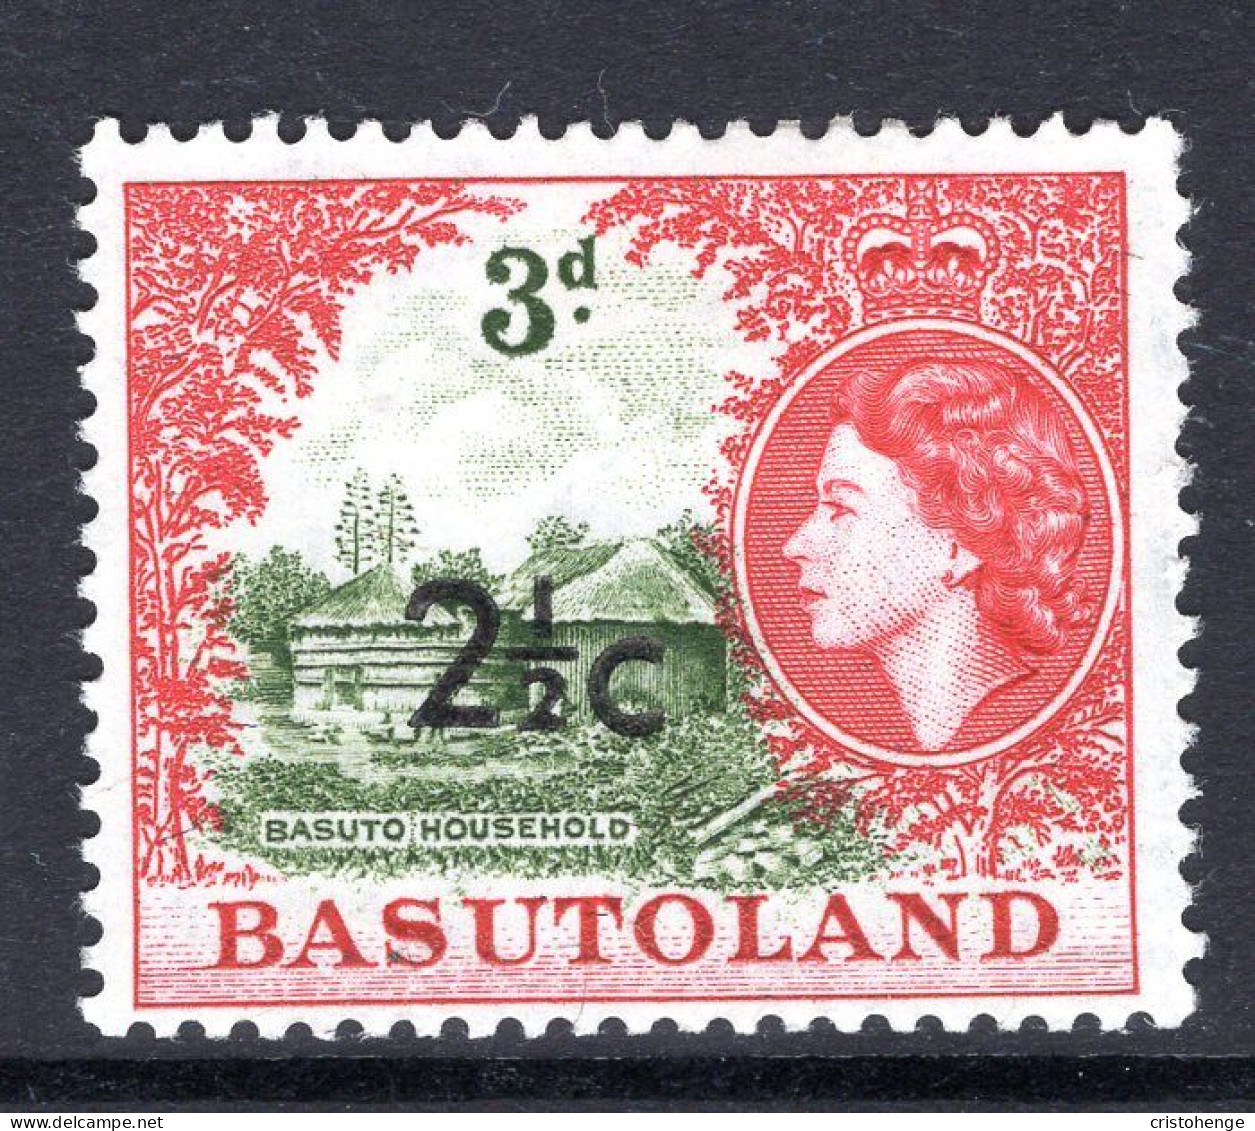 Basutoland 1961 Decimal Surcharges - 2½c On 3d Basuto Household - Type II - HM (SG 61a) - 1933-1964 Colonia Británica